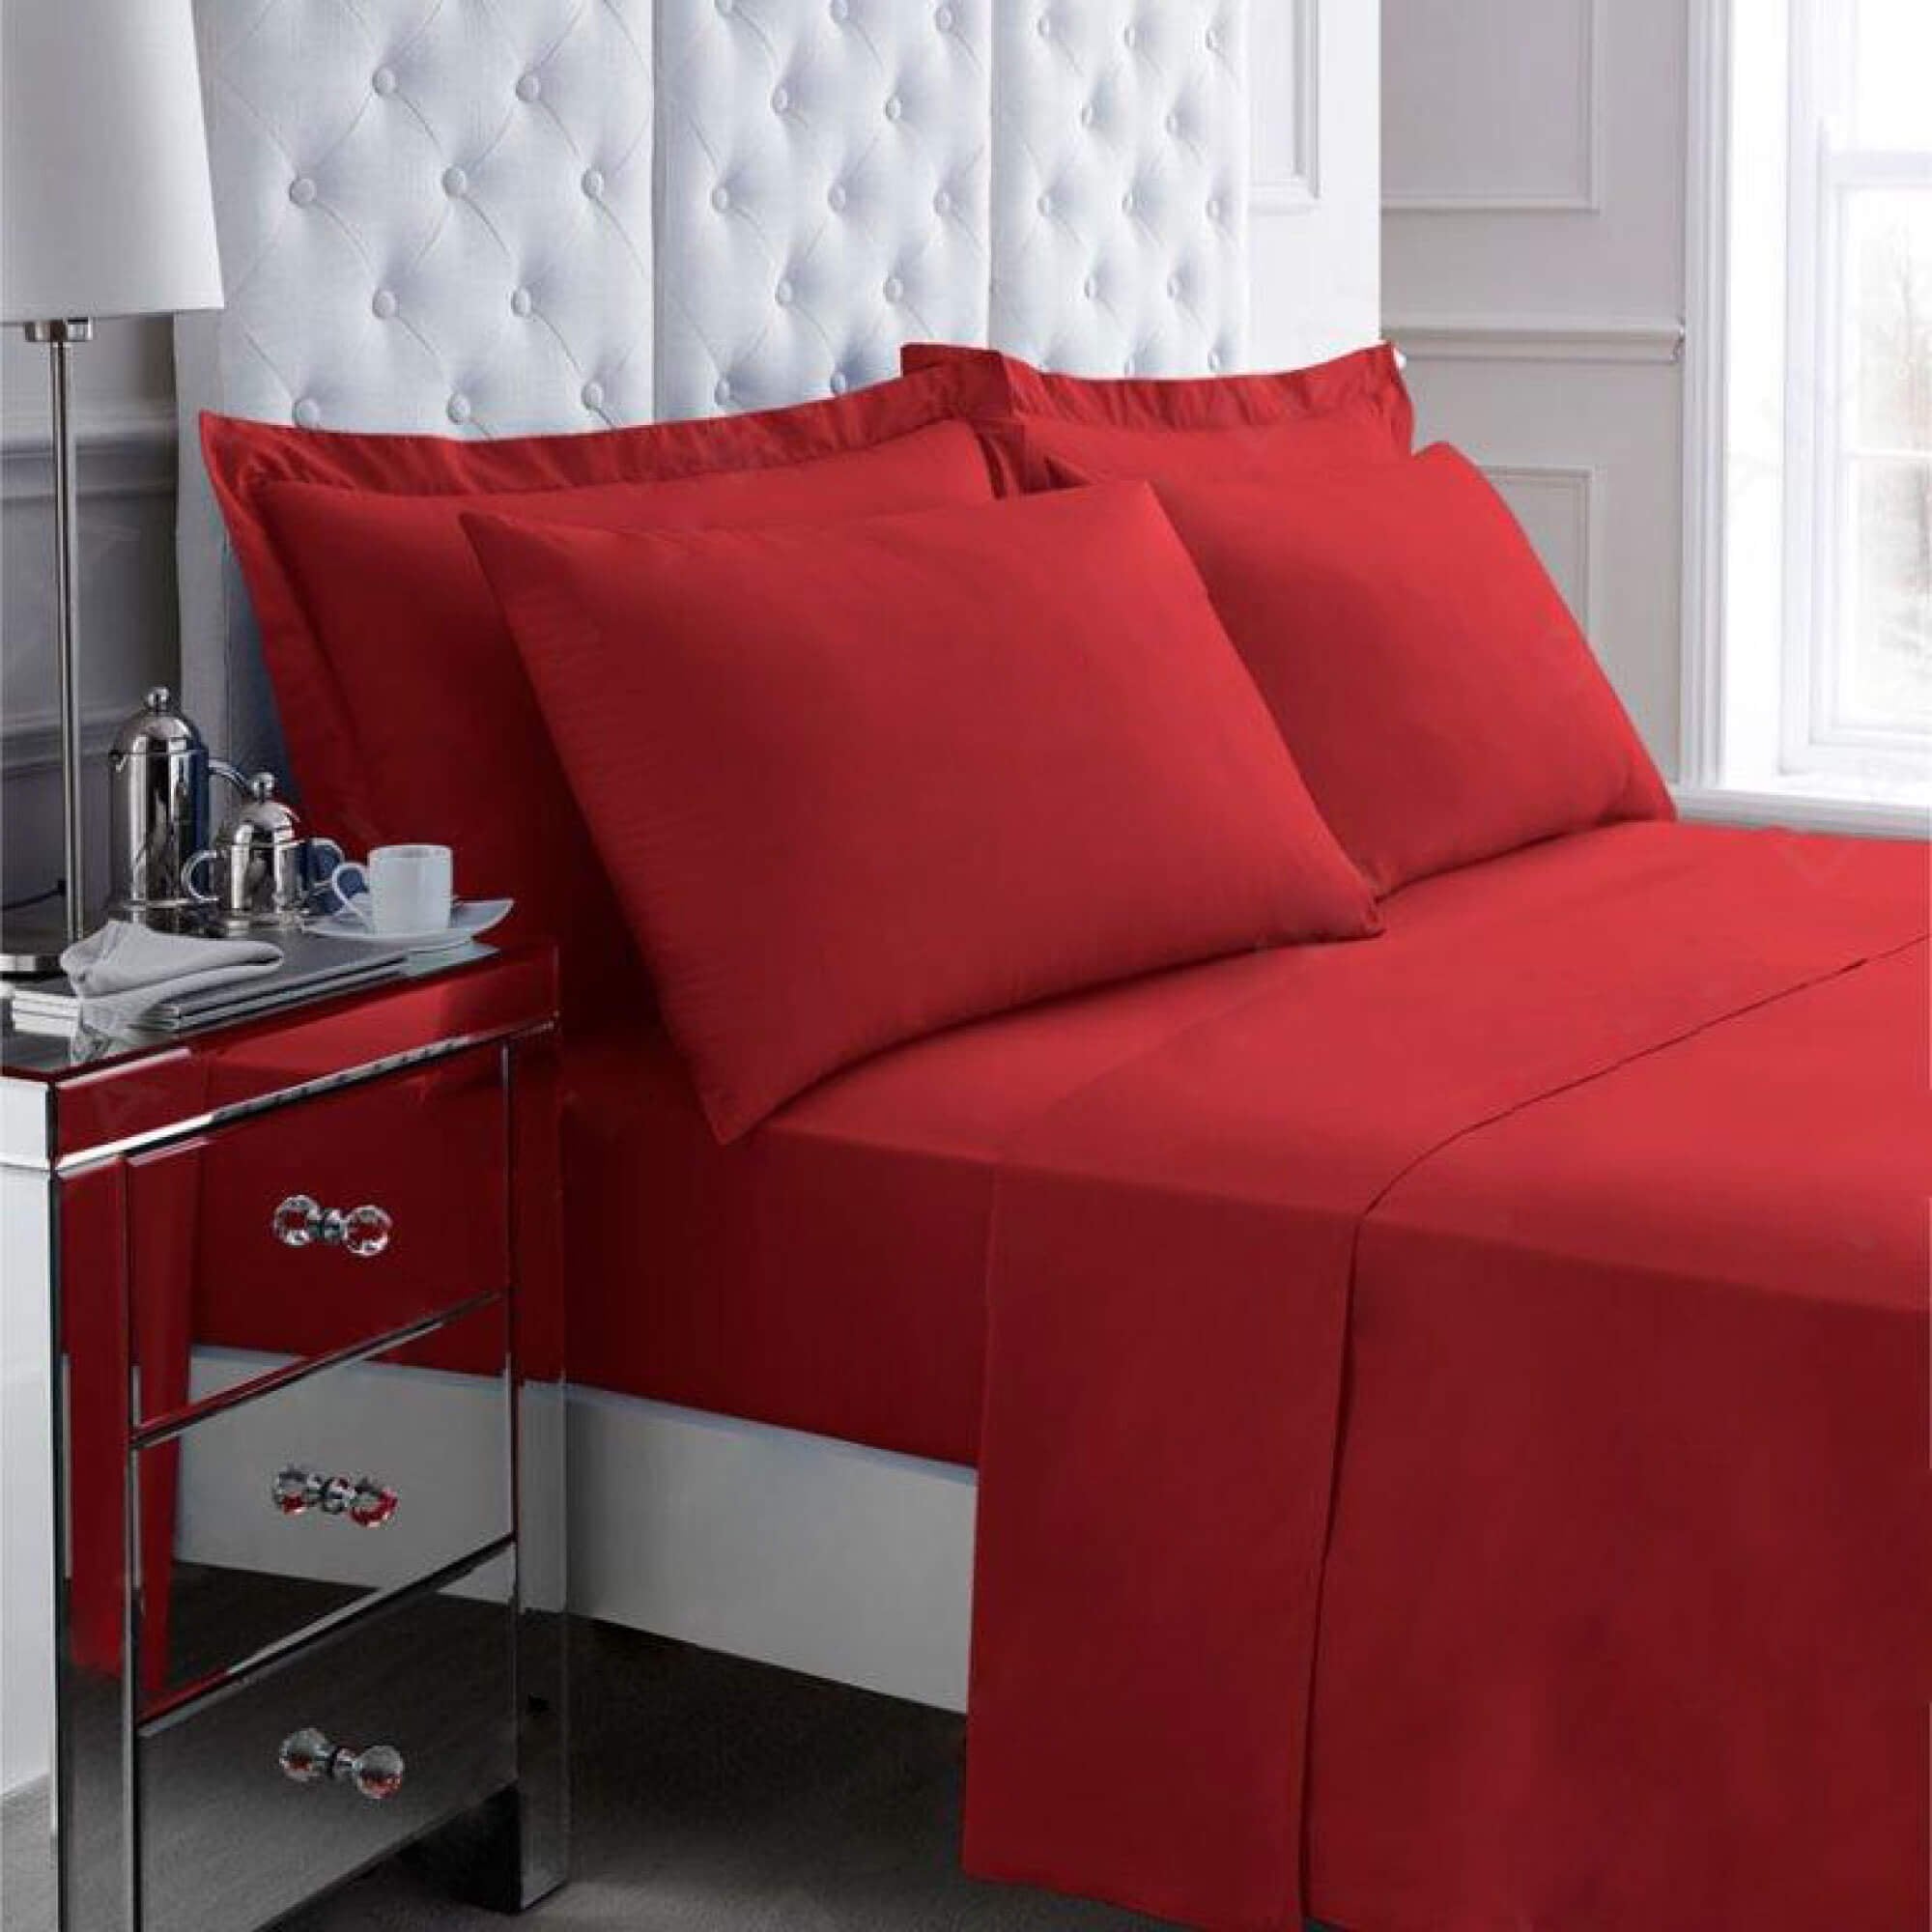 Non Iron Percale Bedding Sheet Range - Red - King Fitted - TJ Hughes